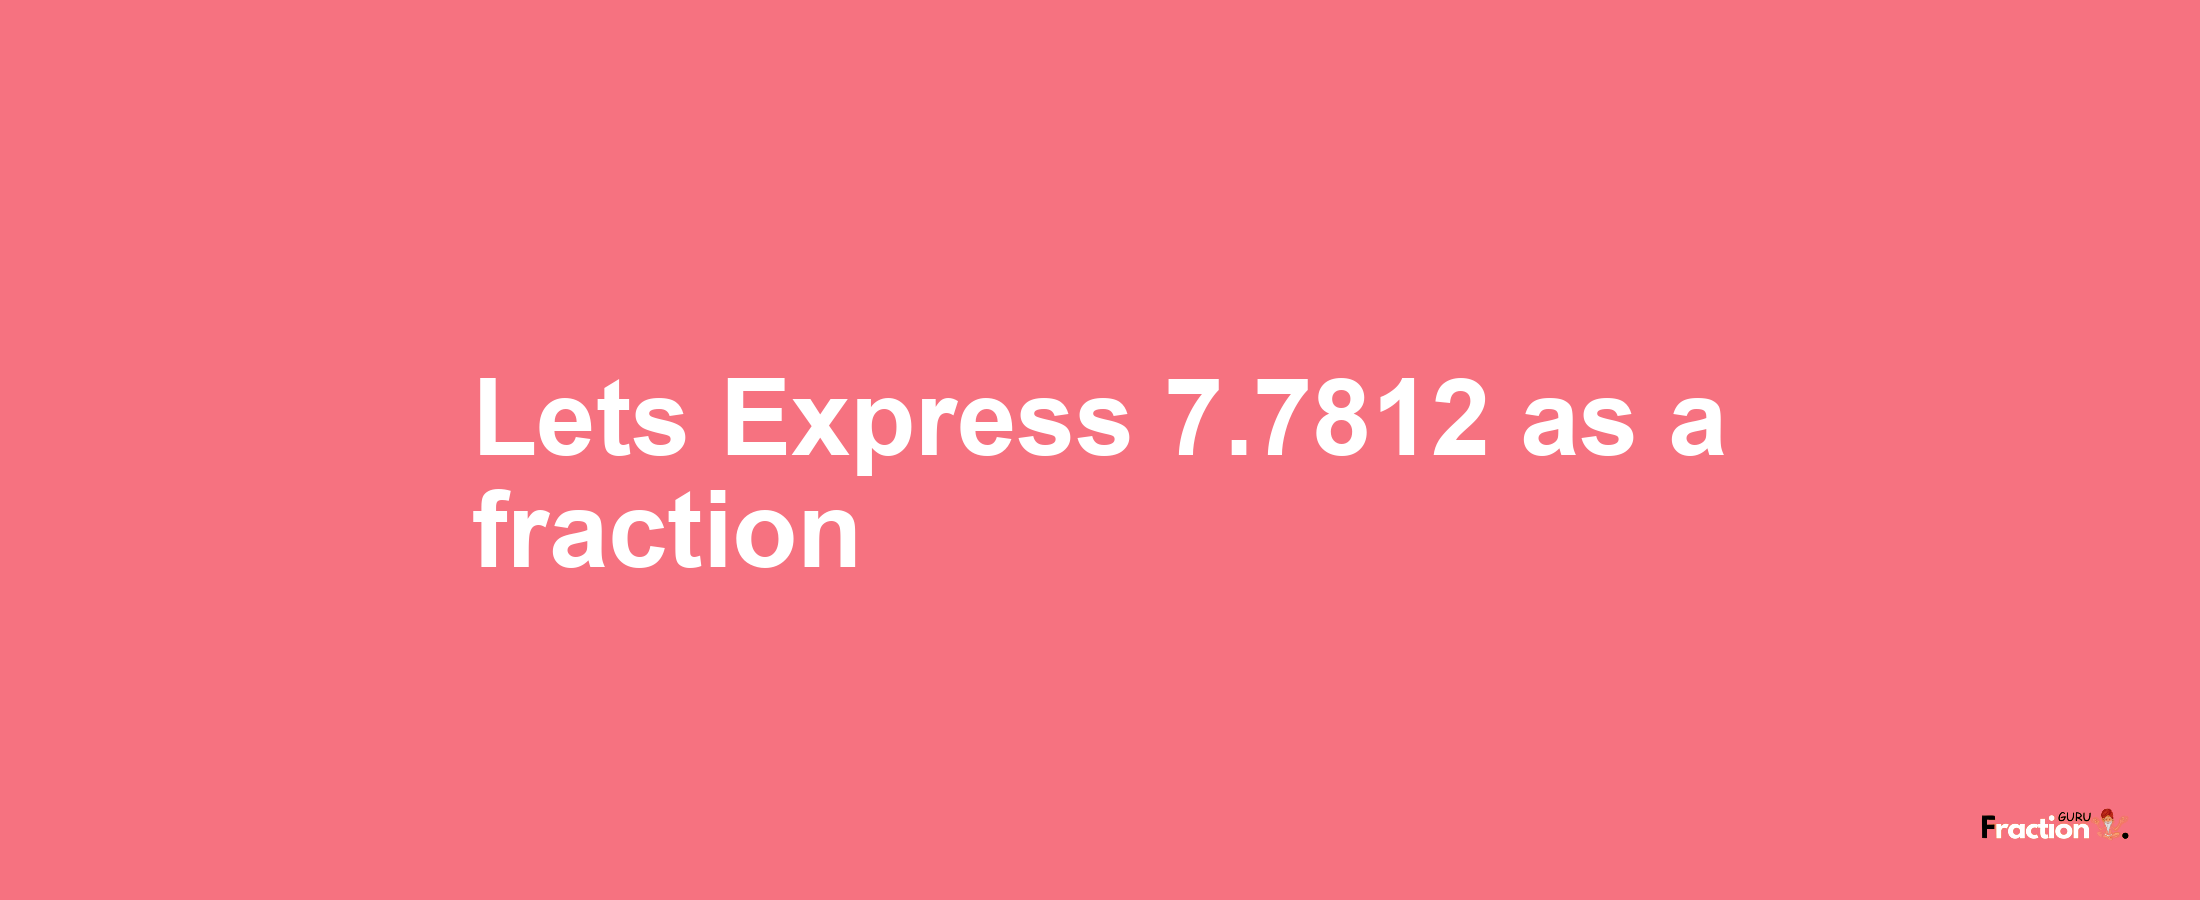 Lets Express 7.7812 as afraction